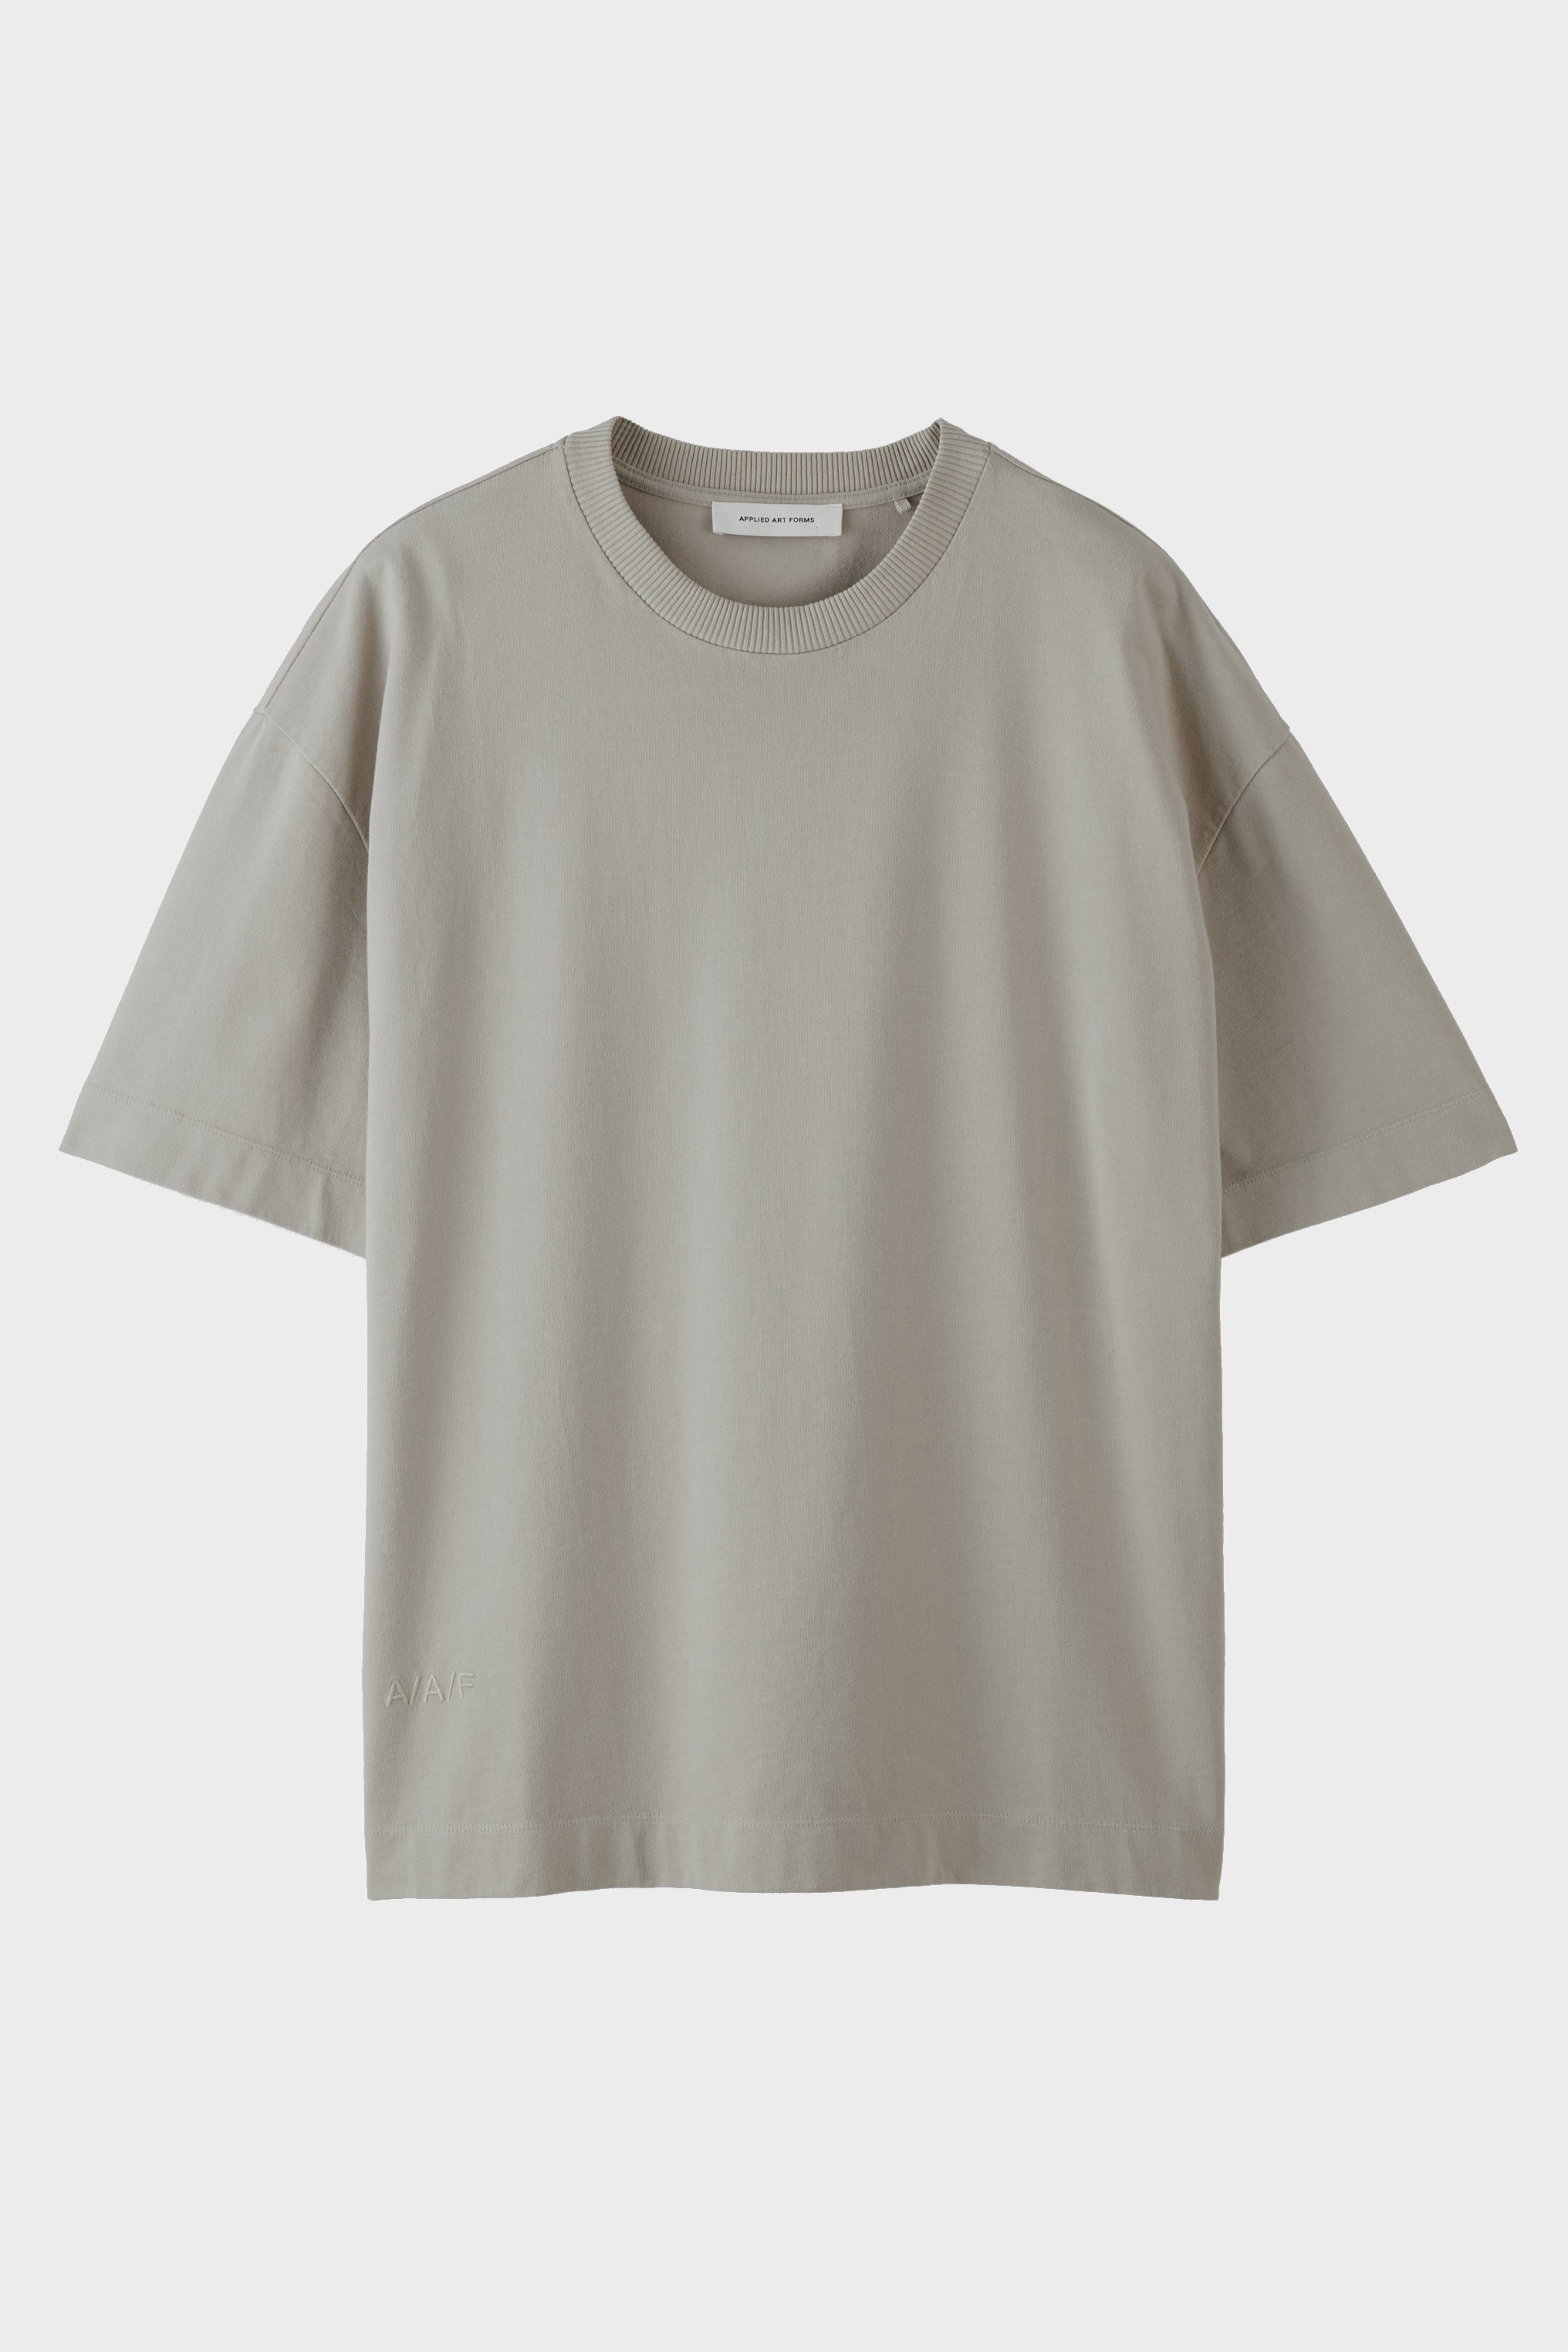 APPLIED ART FORMS Oversize T-Shirt in Ghost Grey